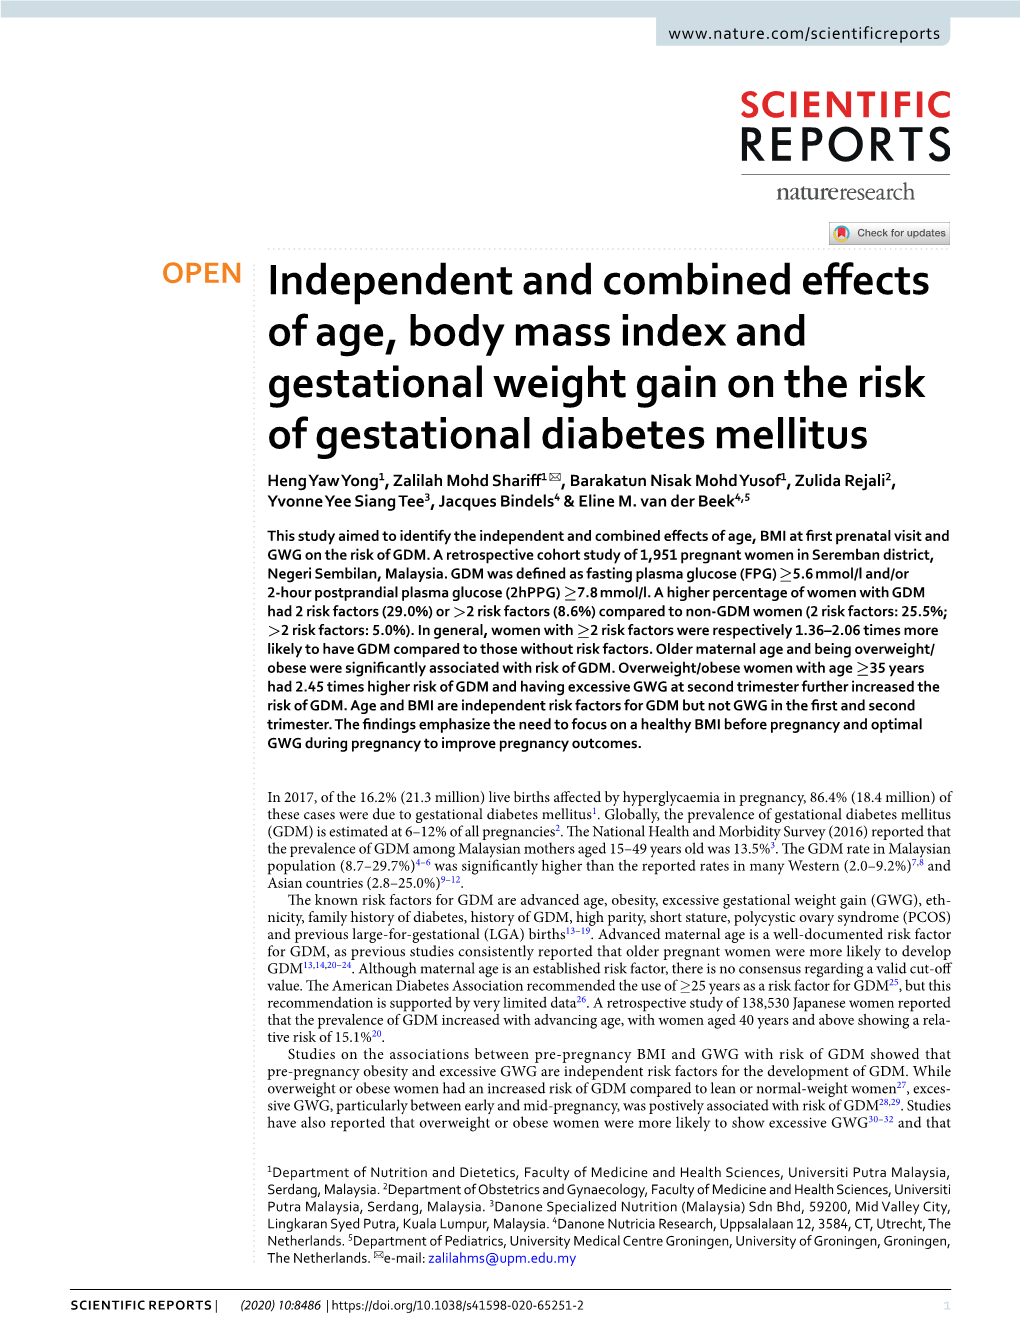 Independent and Combined Effects of Age, Body Mass Index And